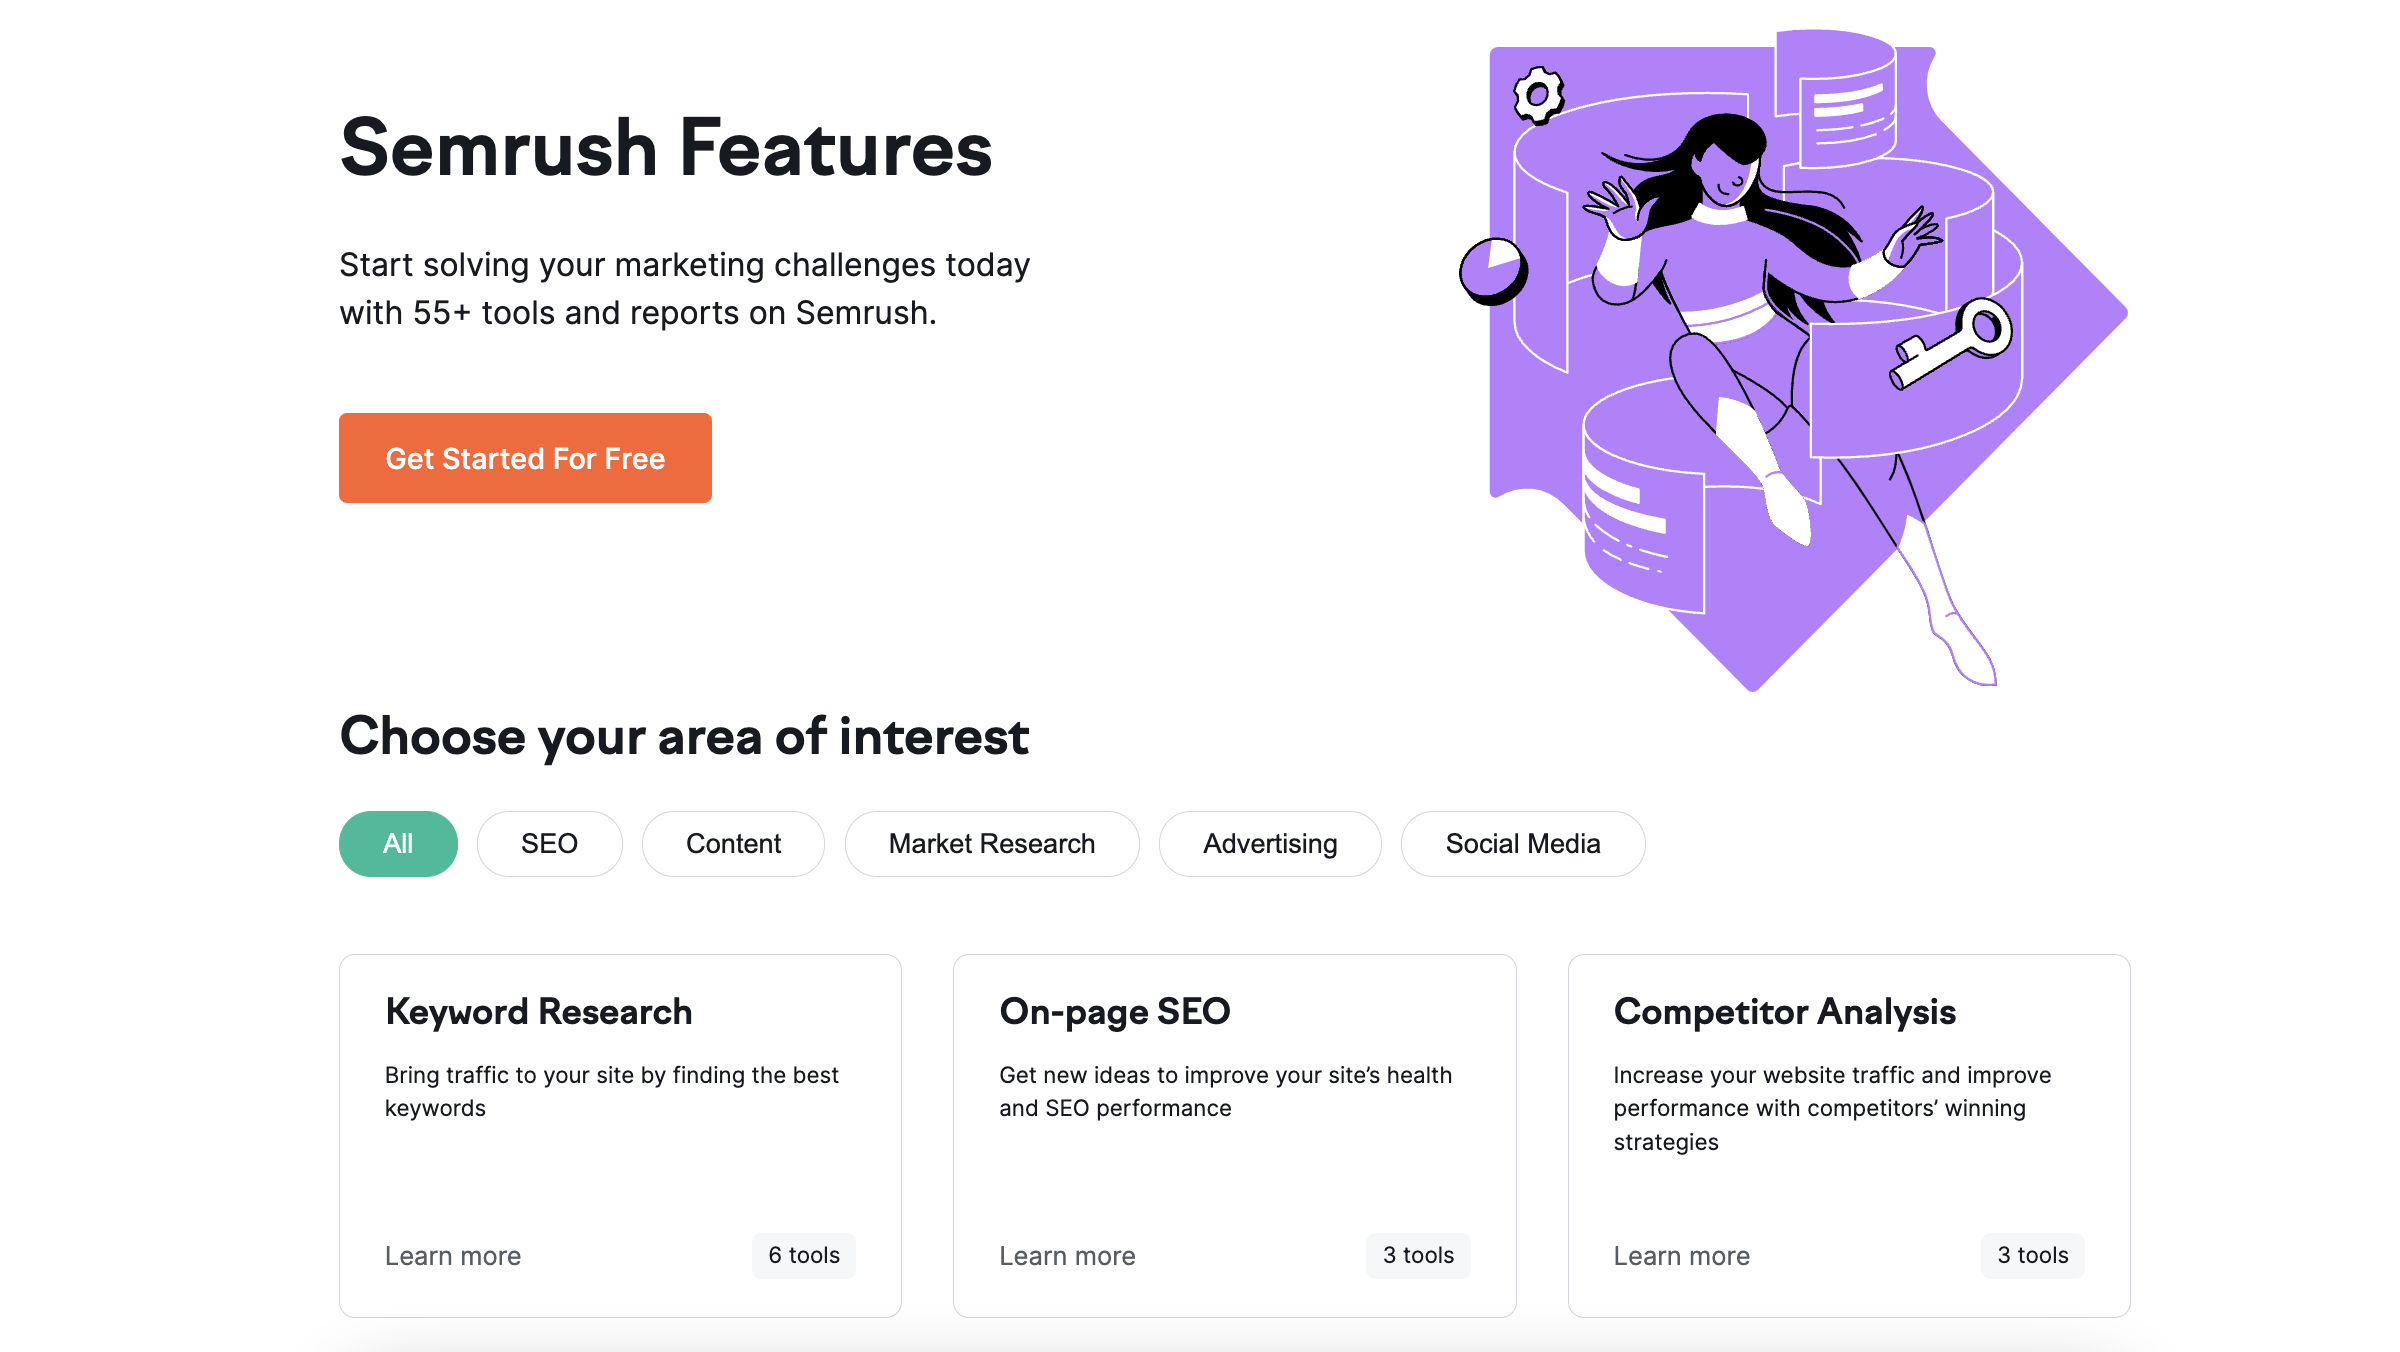 Screenshot of Semrush features page with free tools sorted by SEO, content, market research, advertising, and social media